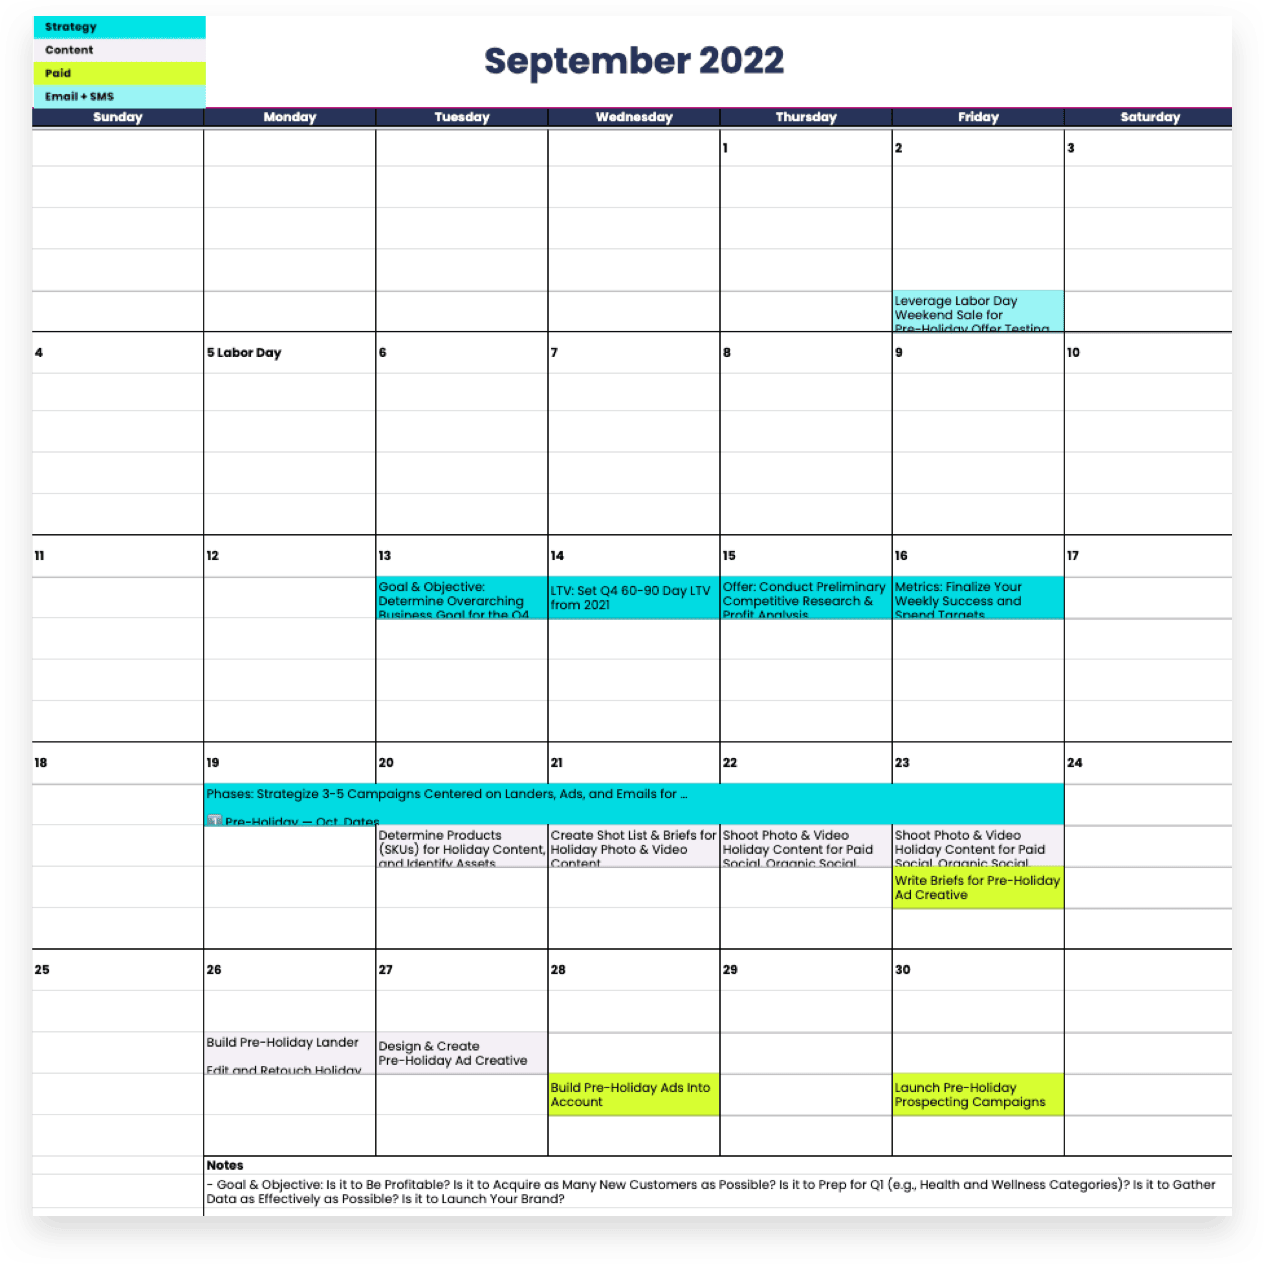 September 2022 Planner for your Black Friday social media campaigns